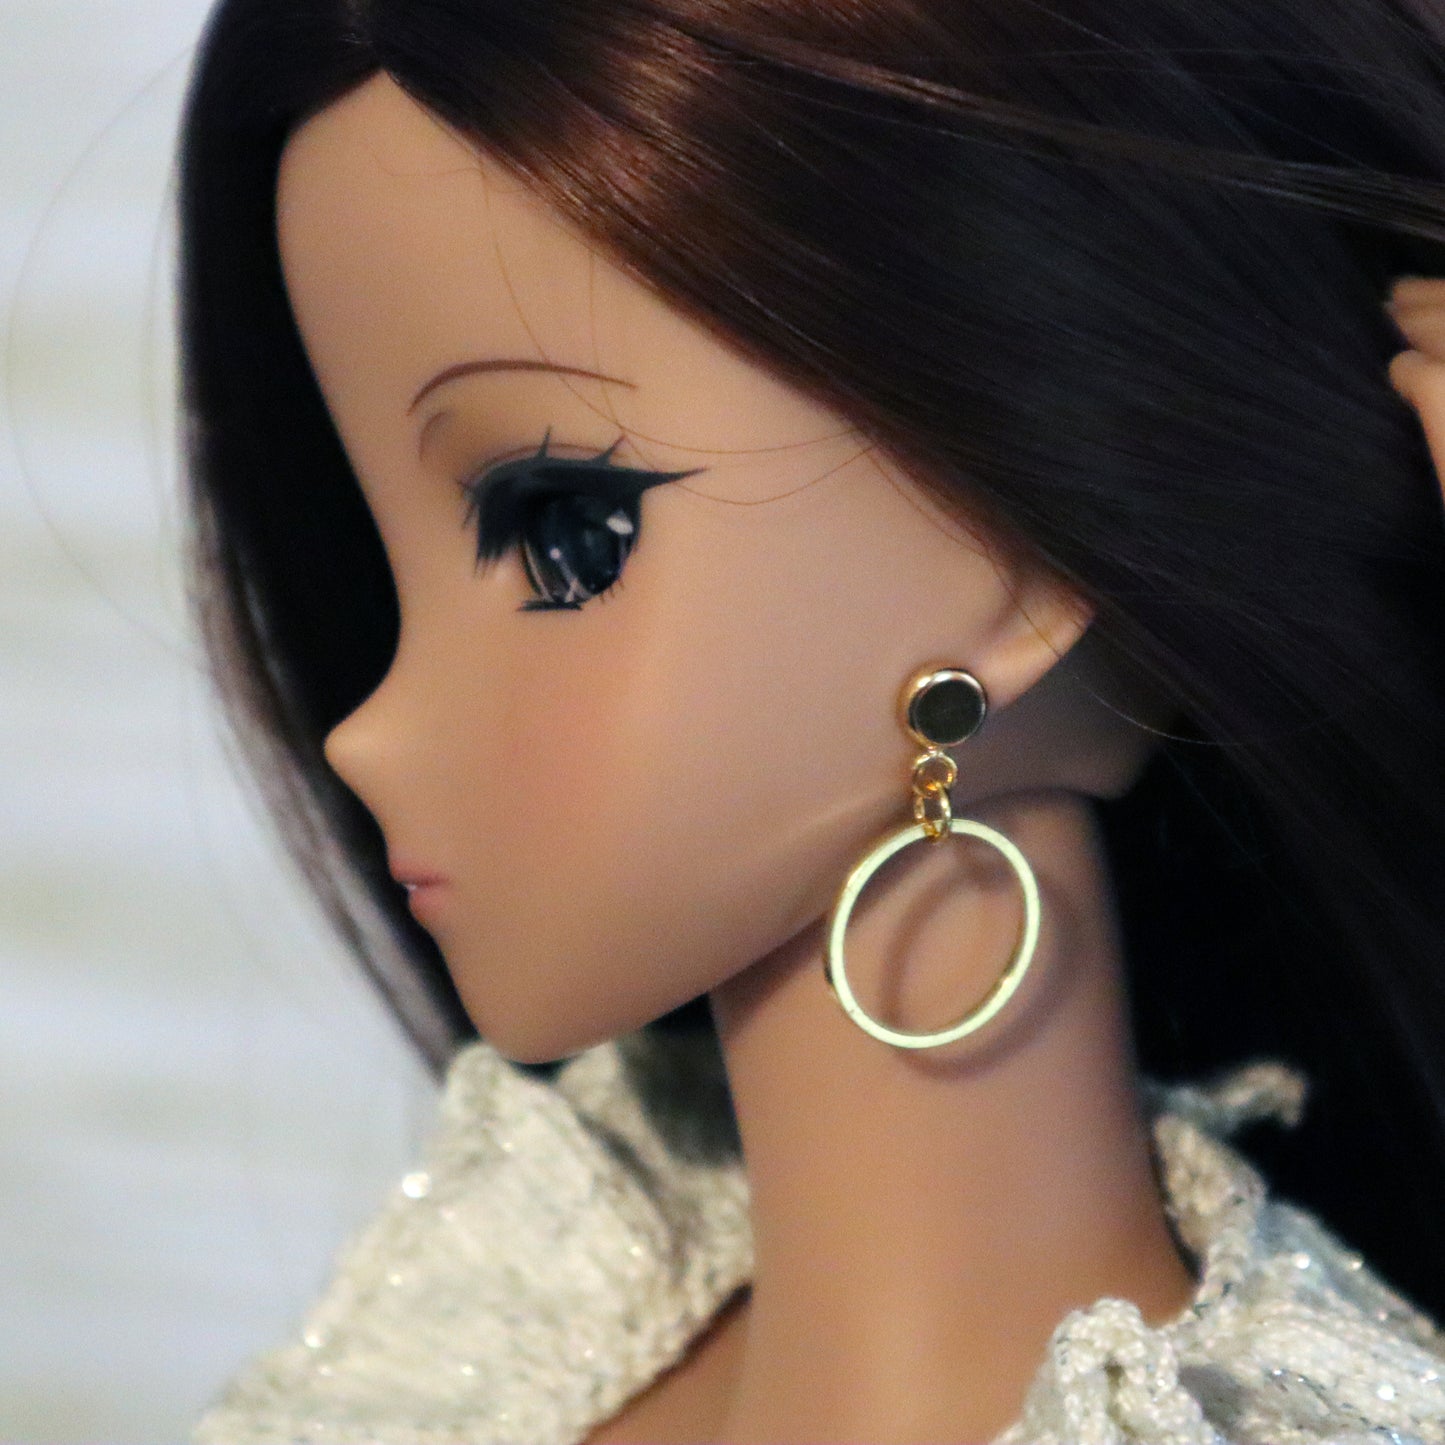 No-Hole Earring for Vinlyl Dolls - Mini Round Hoops (Silver or Gold)